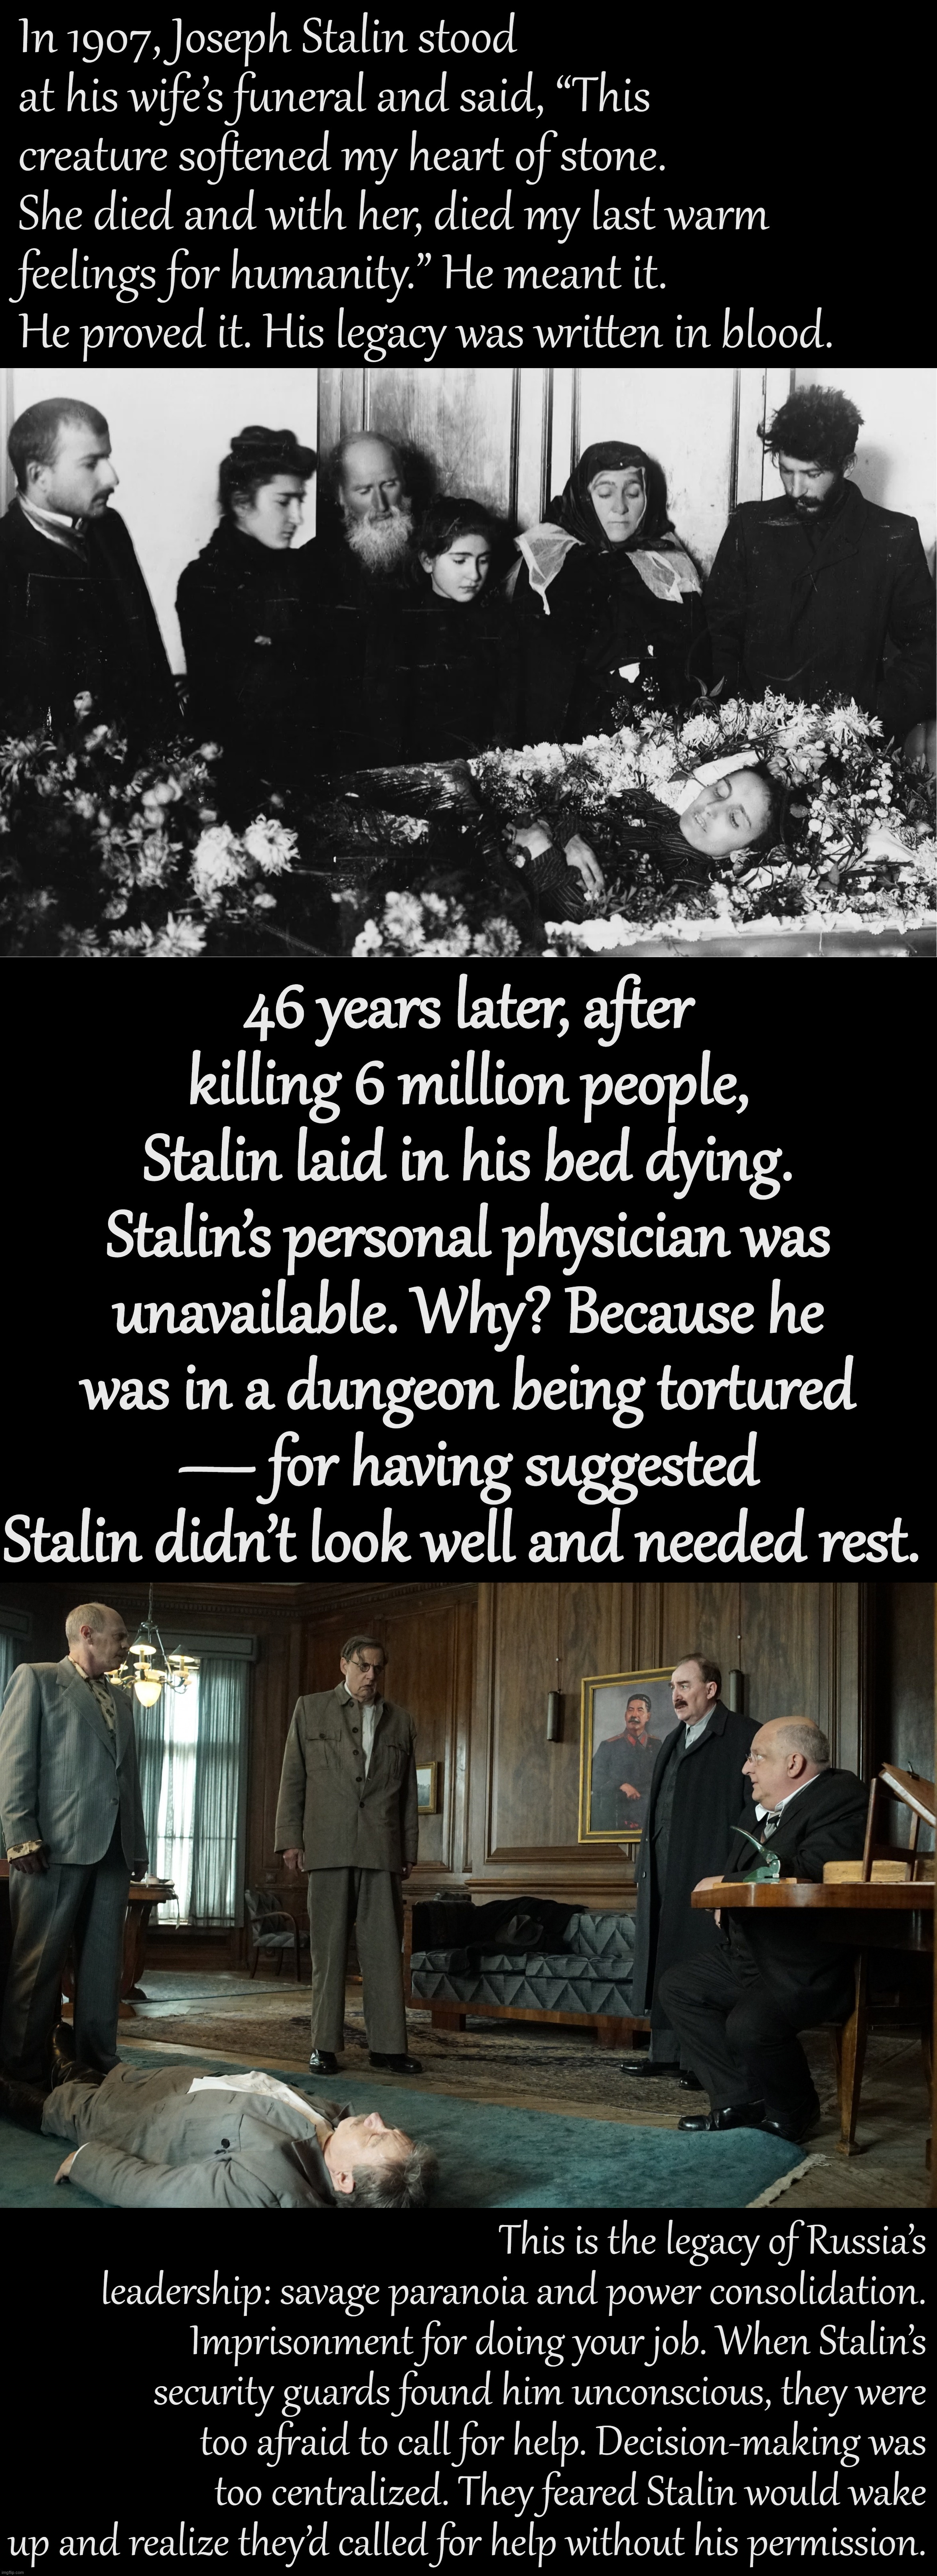 A meme I guess | In 1907, Joseph Stalin stood at his wife’s funeral and said, “This creature softened my heart of stone. She died and with her, died my last warm feelings for humanity.” He meant it. He proved it. His legacy was written in blood. 46 years later, after killing 6 million people, Stalin laid in his bed dying. Stalin’s personal physician was unavailable. Why? Because he was in a dungeon being tortured — for having suggested Stalin didn’t look well and needed rest. This is the legacy of Russia’s leadership: savage paranoia and power consolidation. Imprisonment for doing your job. When Stalin’s security guards found him unconscious, they were too afraid to call for help. Decision-making was too centralized. They feared Stalin would wake up and realize they’d called for help without his permission. | image tagged in stalin at wife's funeral 1907,death of stalin,stalin,joseph stalin,politics,paranoia | made w/ Imgflip meme maker